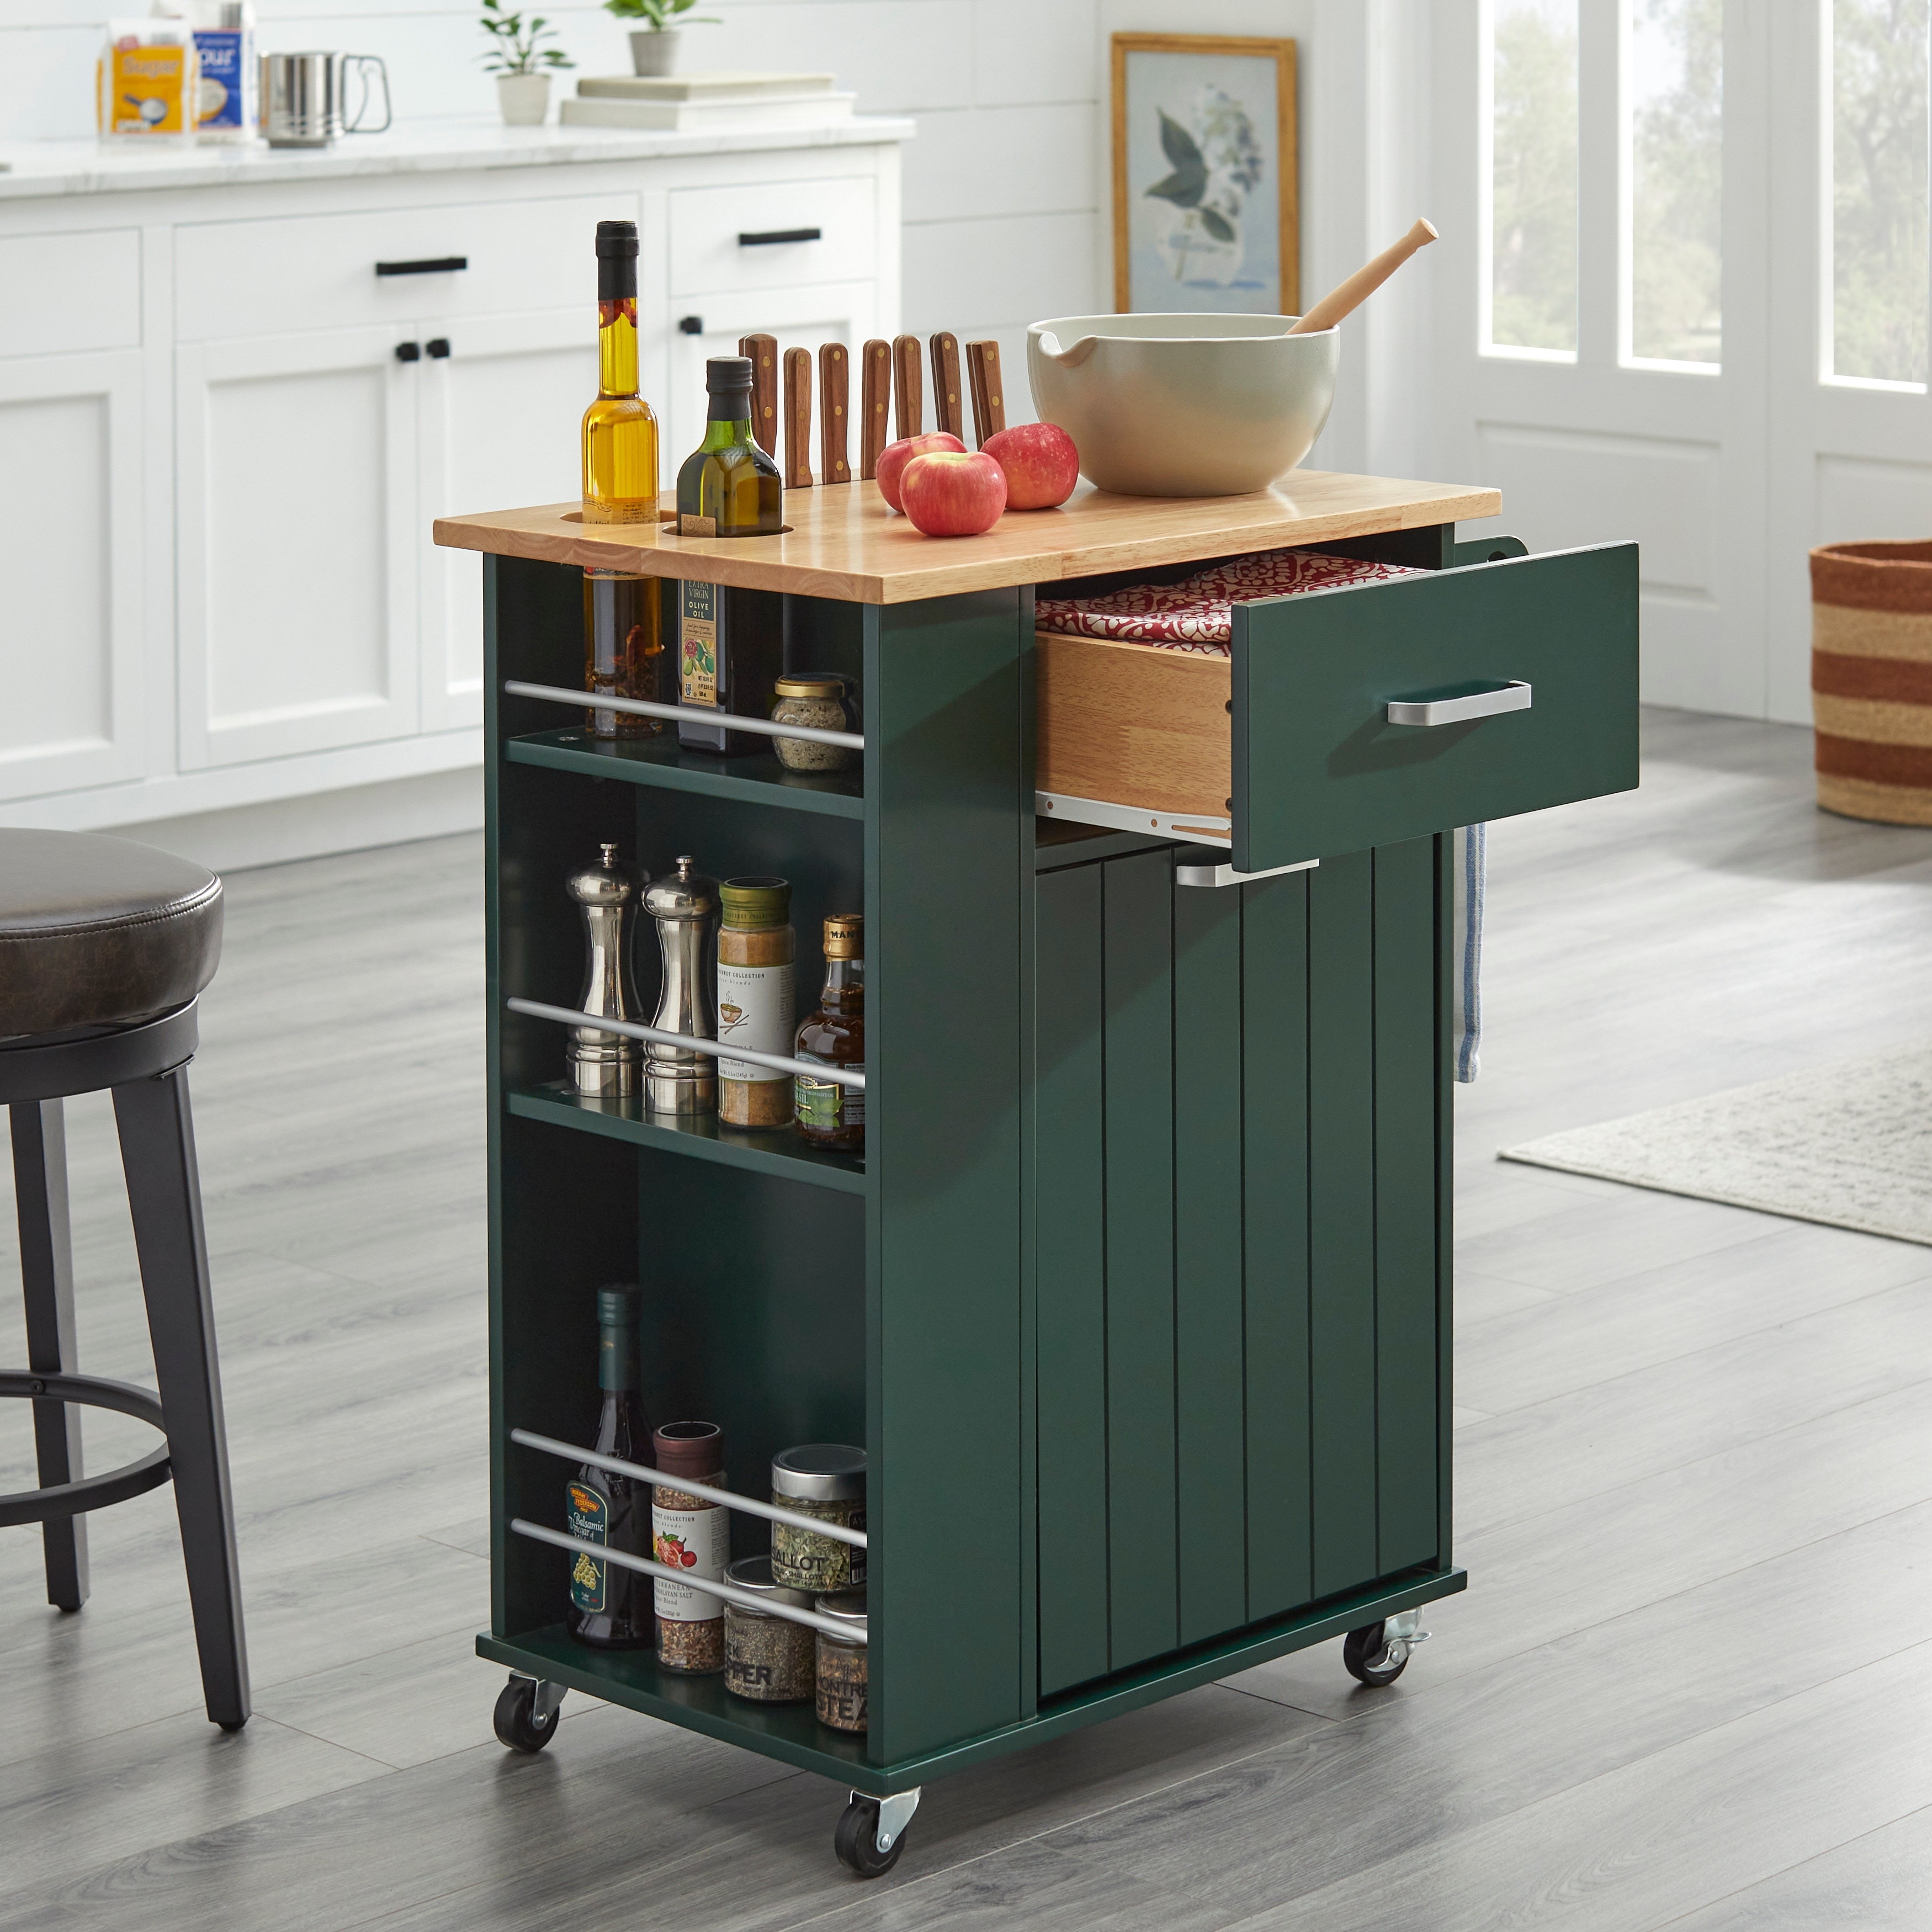 https://ak1.ostkcdn.com/images/products/is/images/direct/43e69f219798ae9d41b8588a304ef9fa26f8d61e/Simple-Living-Lima-Rolling-Kitchen-Cart.jpg